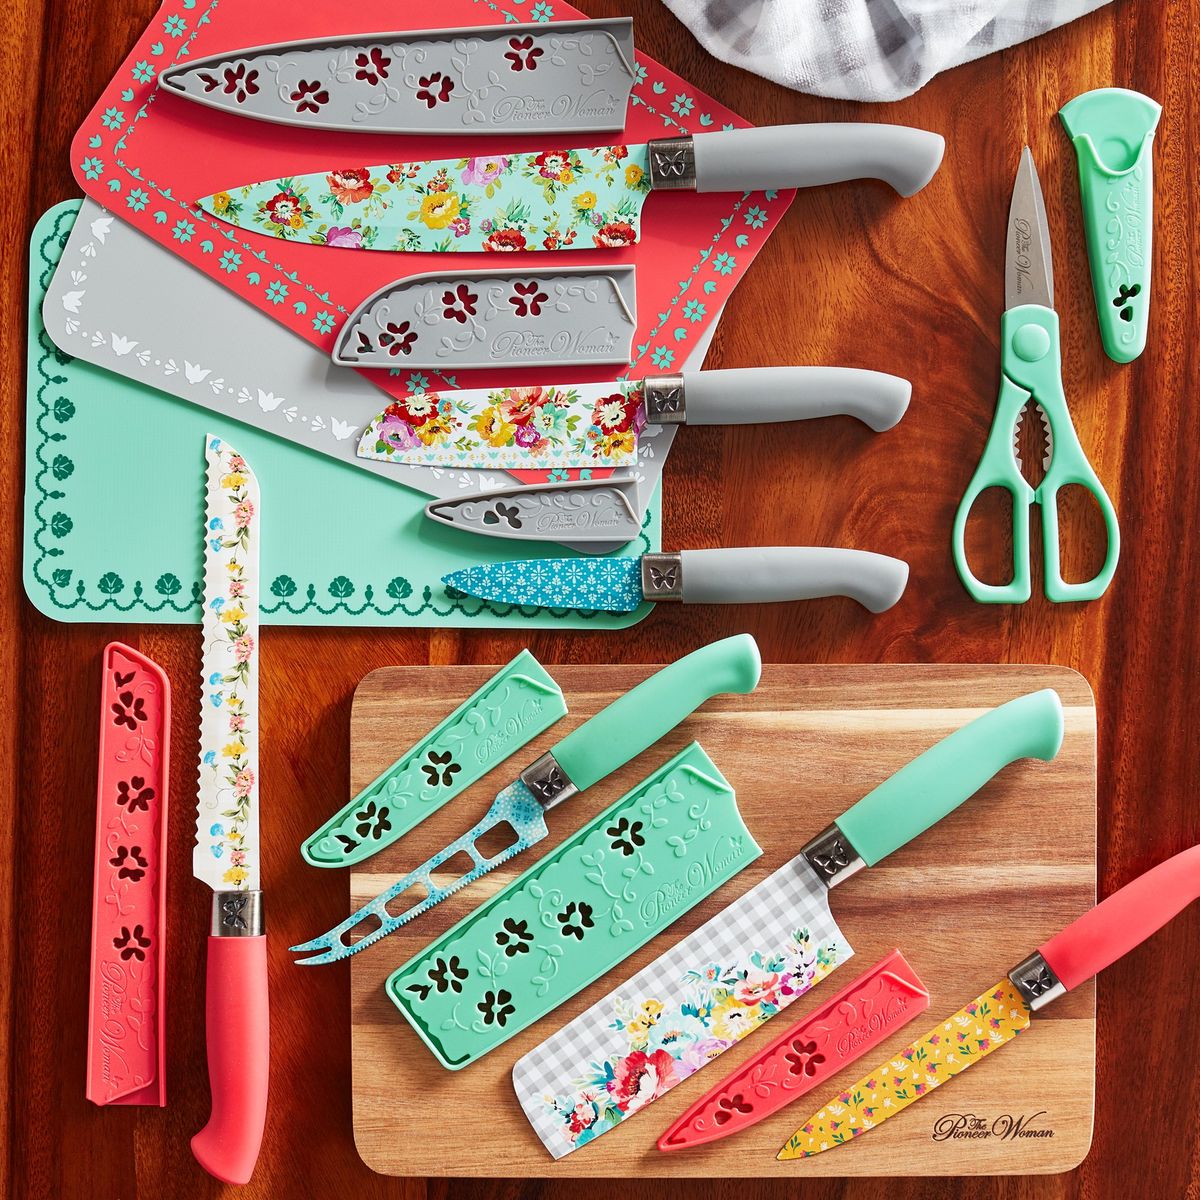 https://hips.hearstapps.com/hmg-prod/images/the-pioneer-woman-cutlery-set-1638208608.jpeg?crop=1xw:1xh;center,top&resize=1200:*